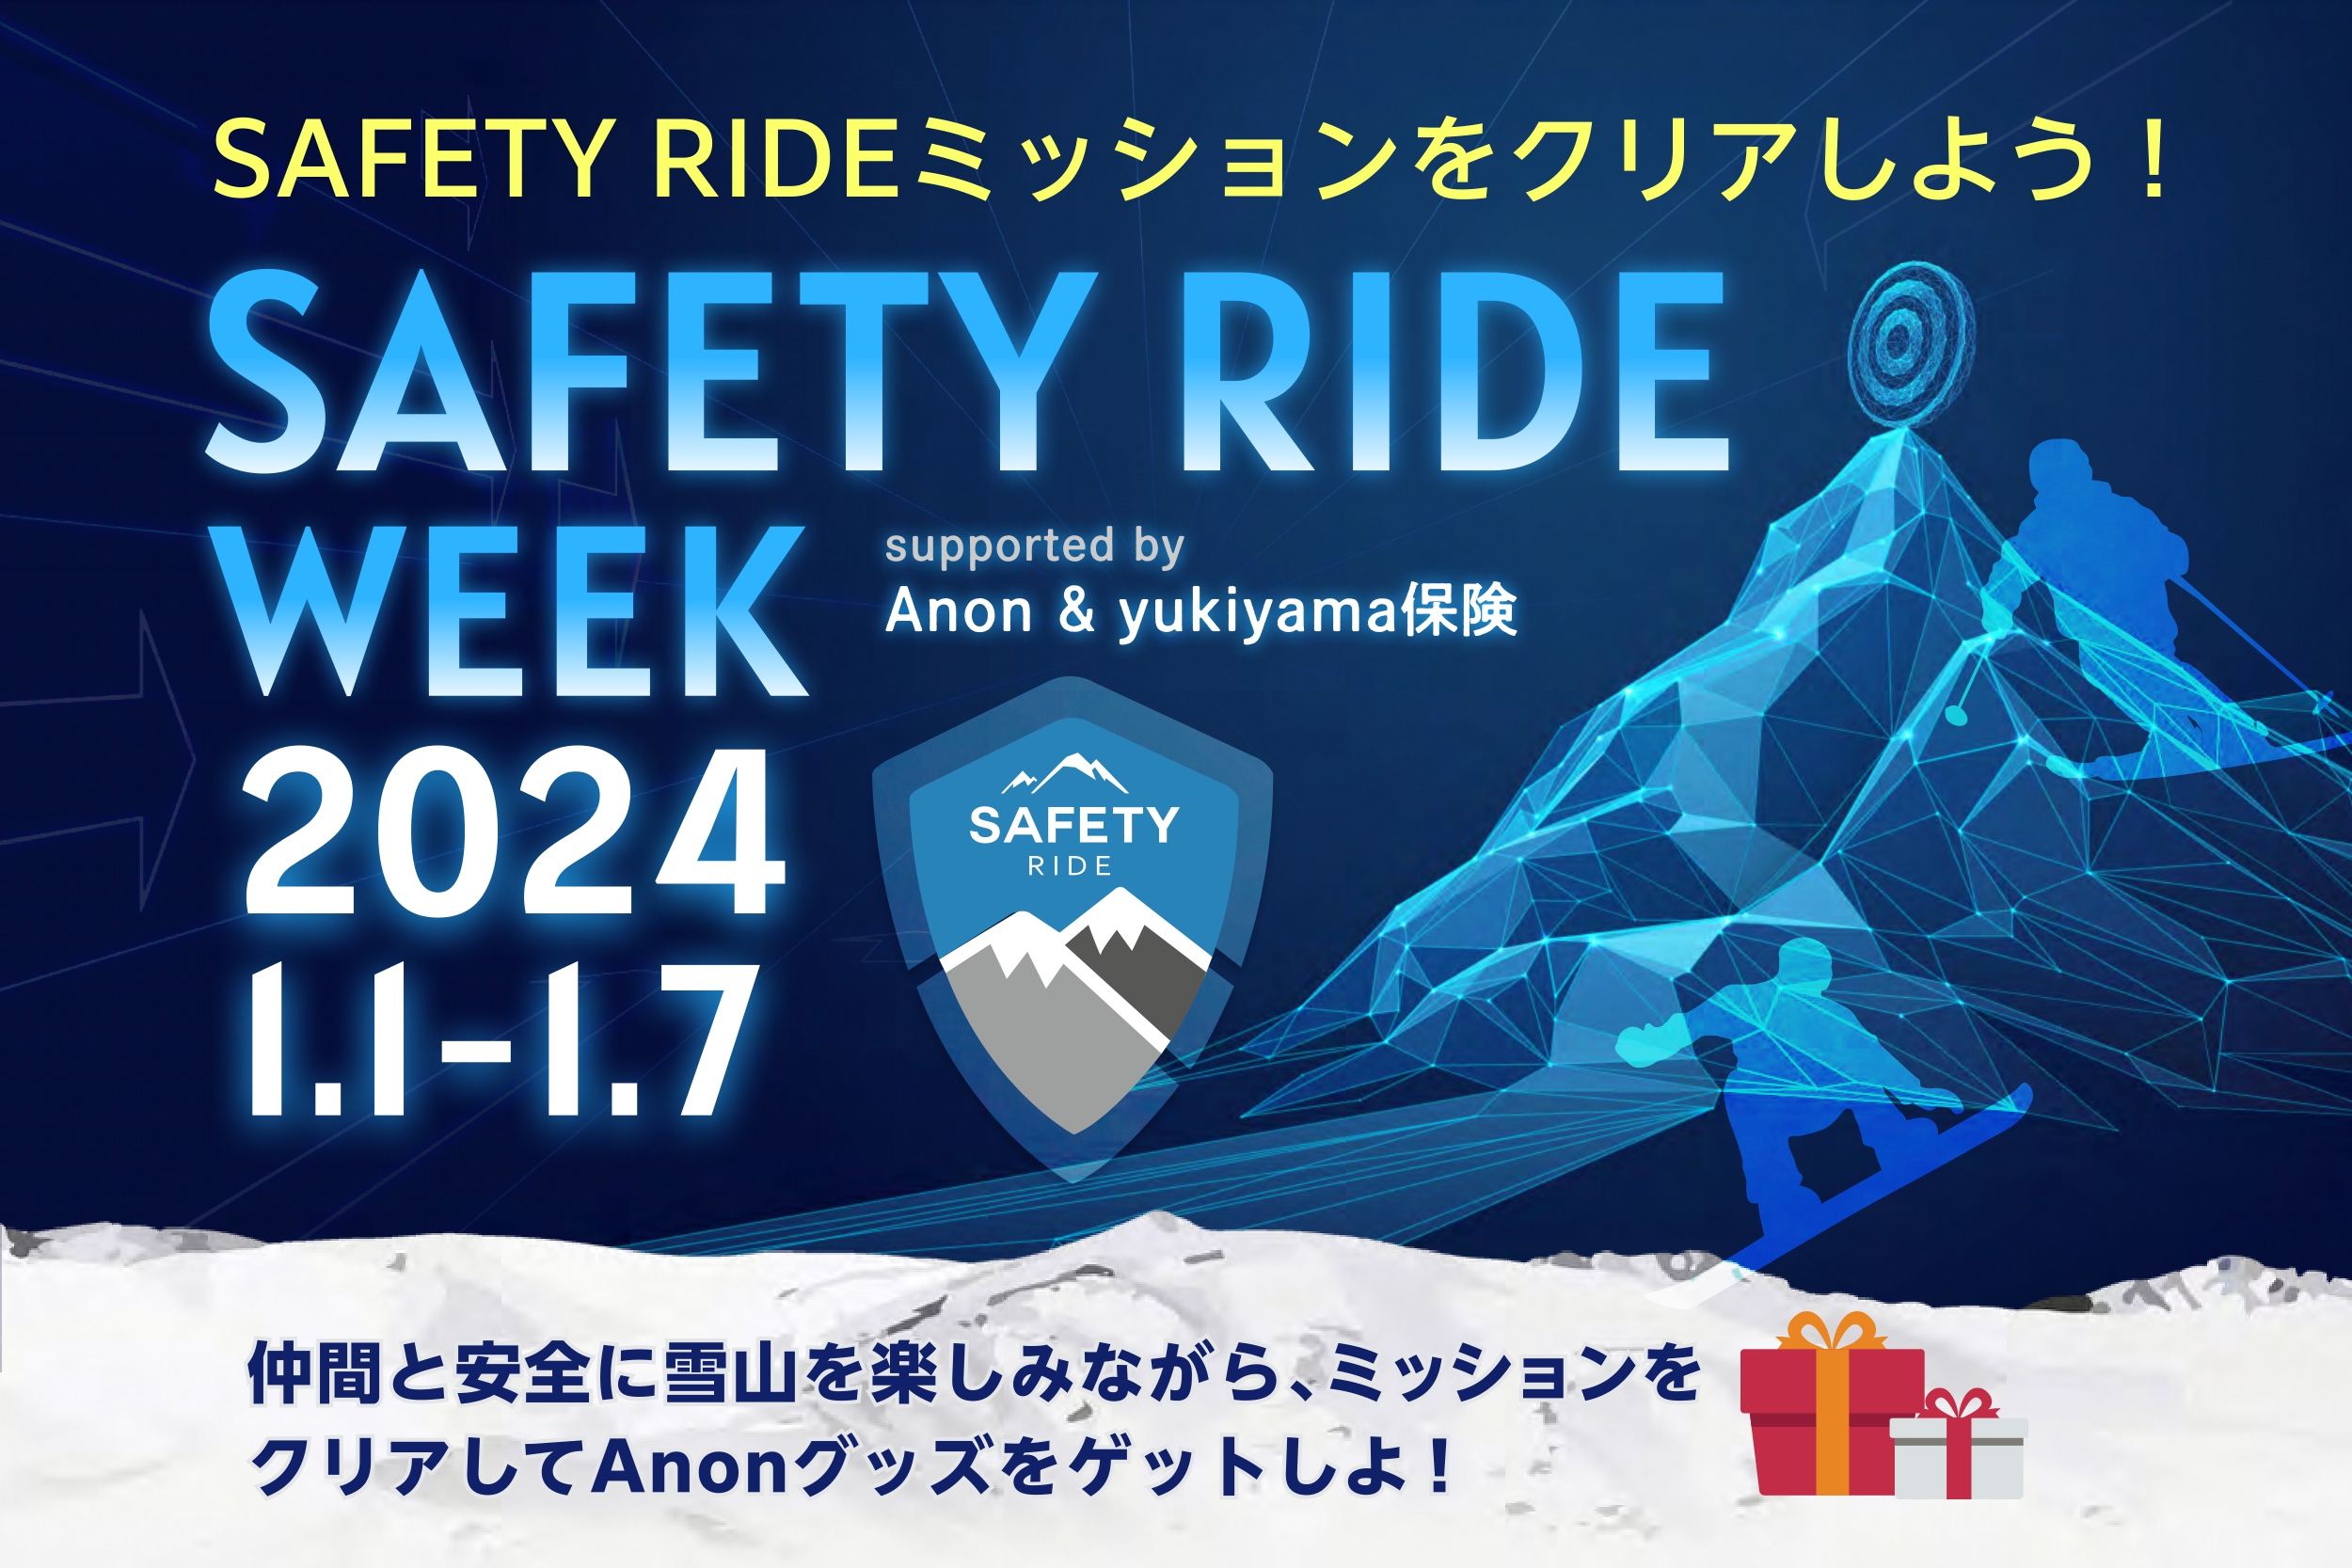 SAFETY RIDE WEEK supported by Anon & yukiyama保険